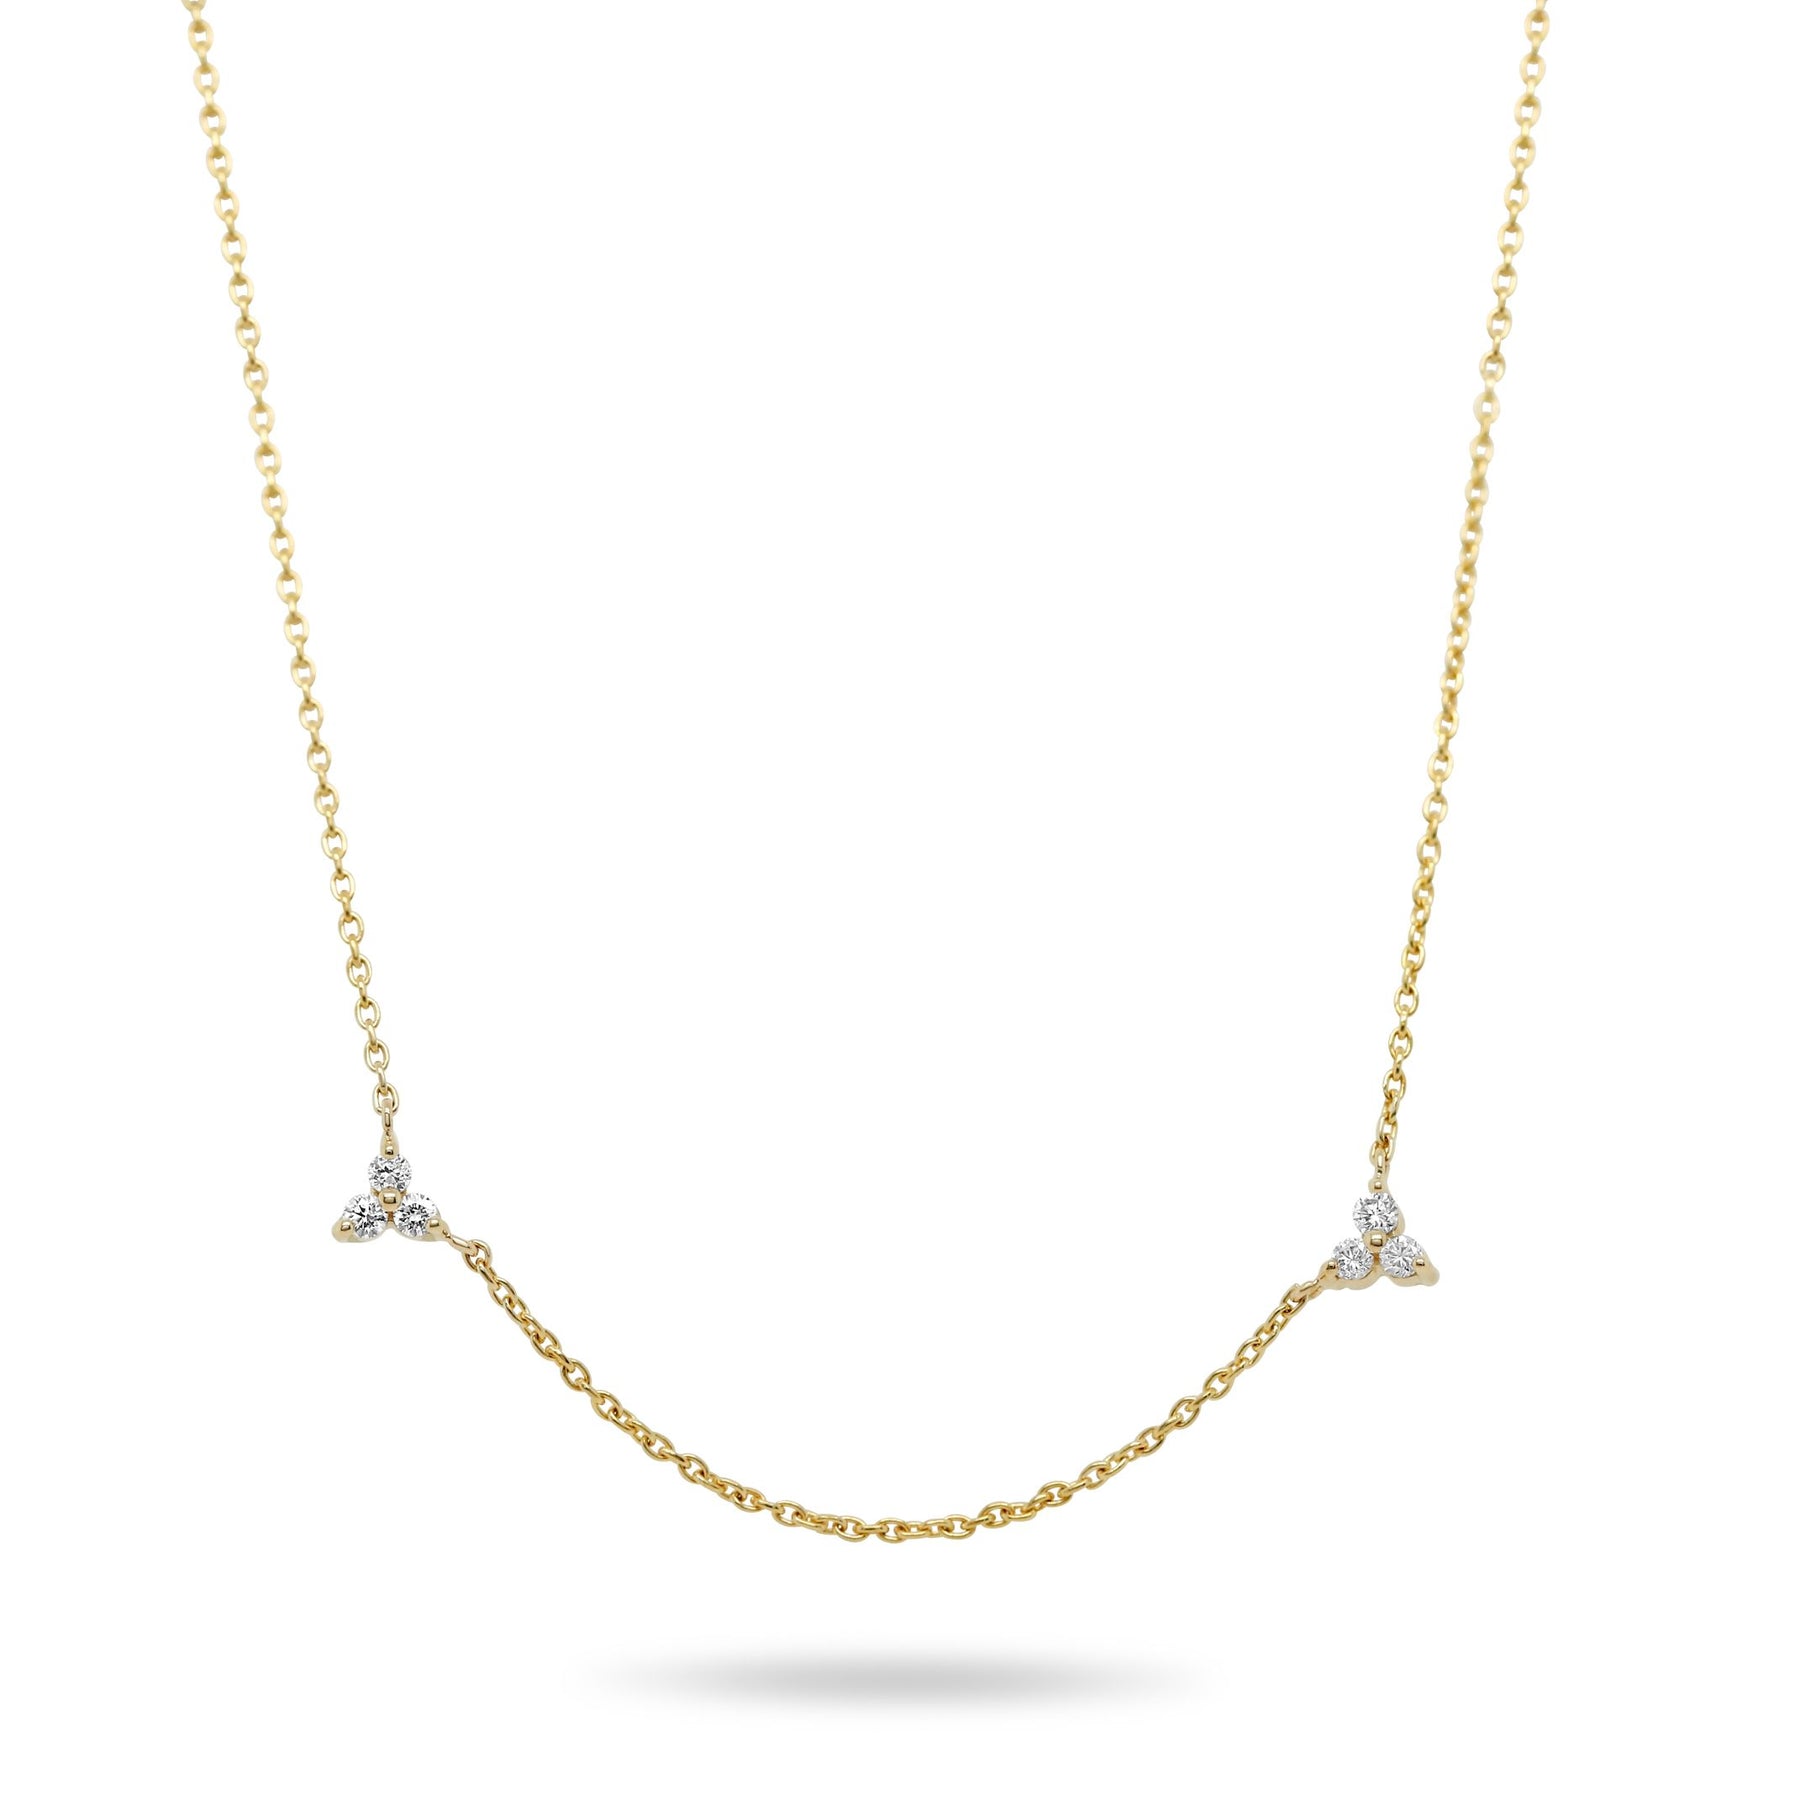 14k yellow gold diamond station necklace 16in chain